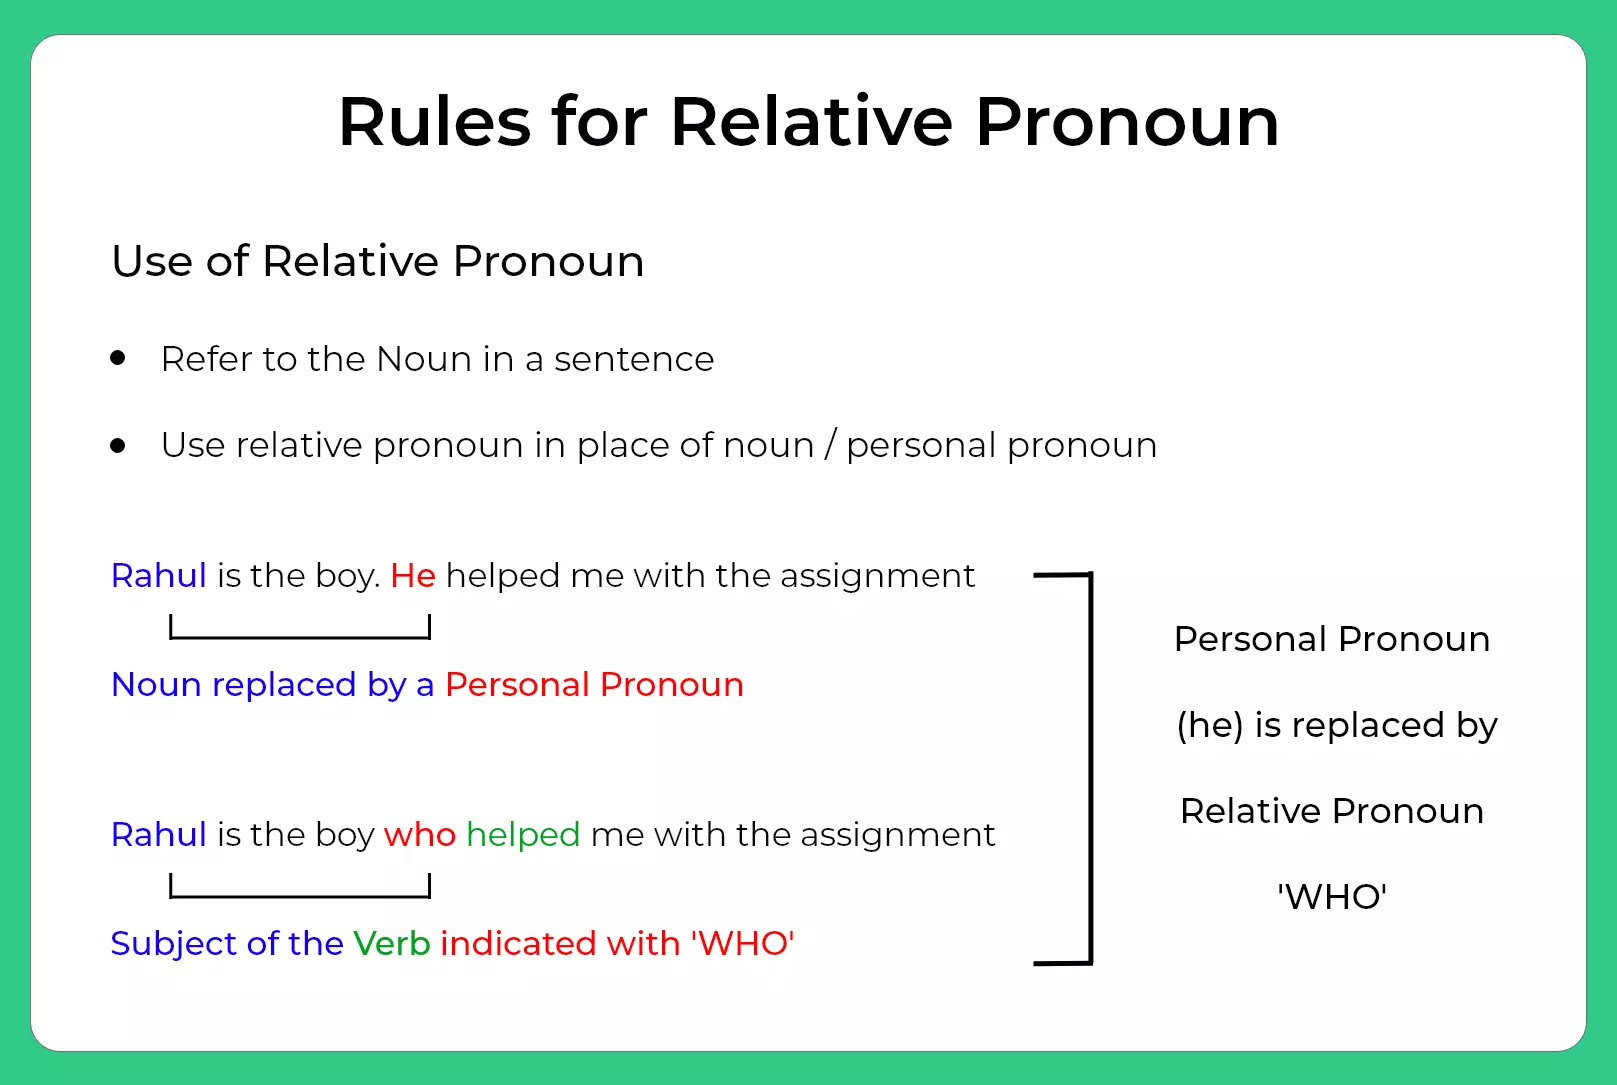 Rules for Relative Pronoun